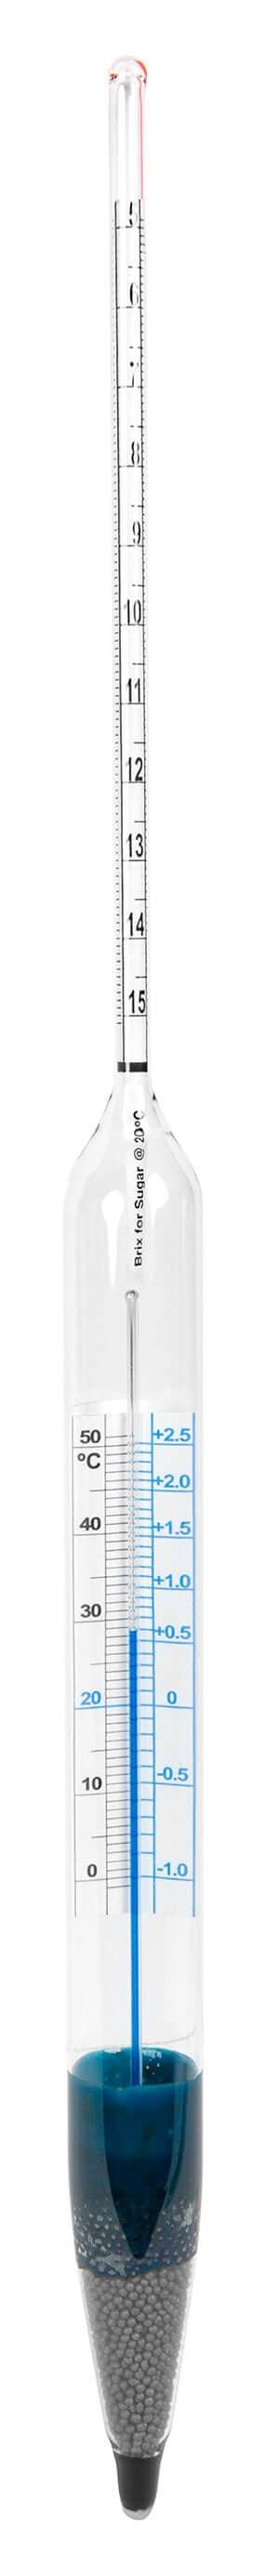 Brix Hydrometers with Thermometer (°C) from VEE GEE Scientific